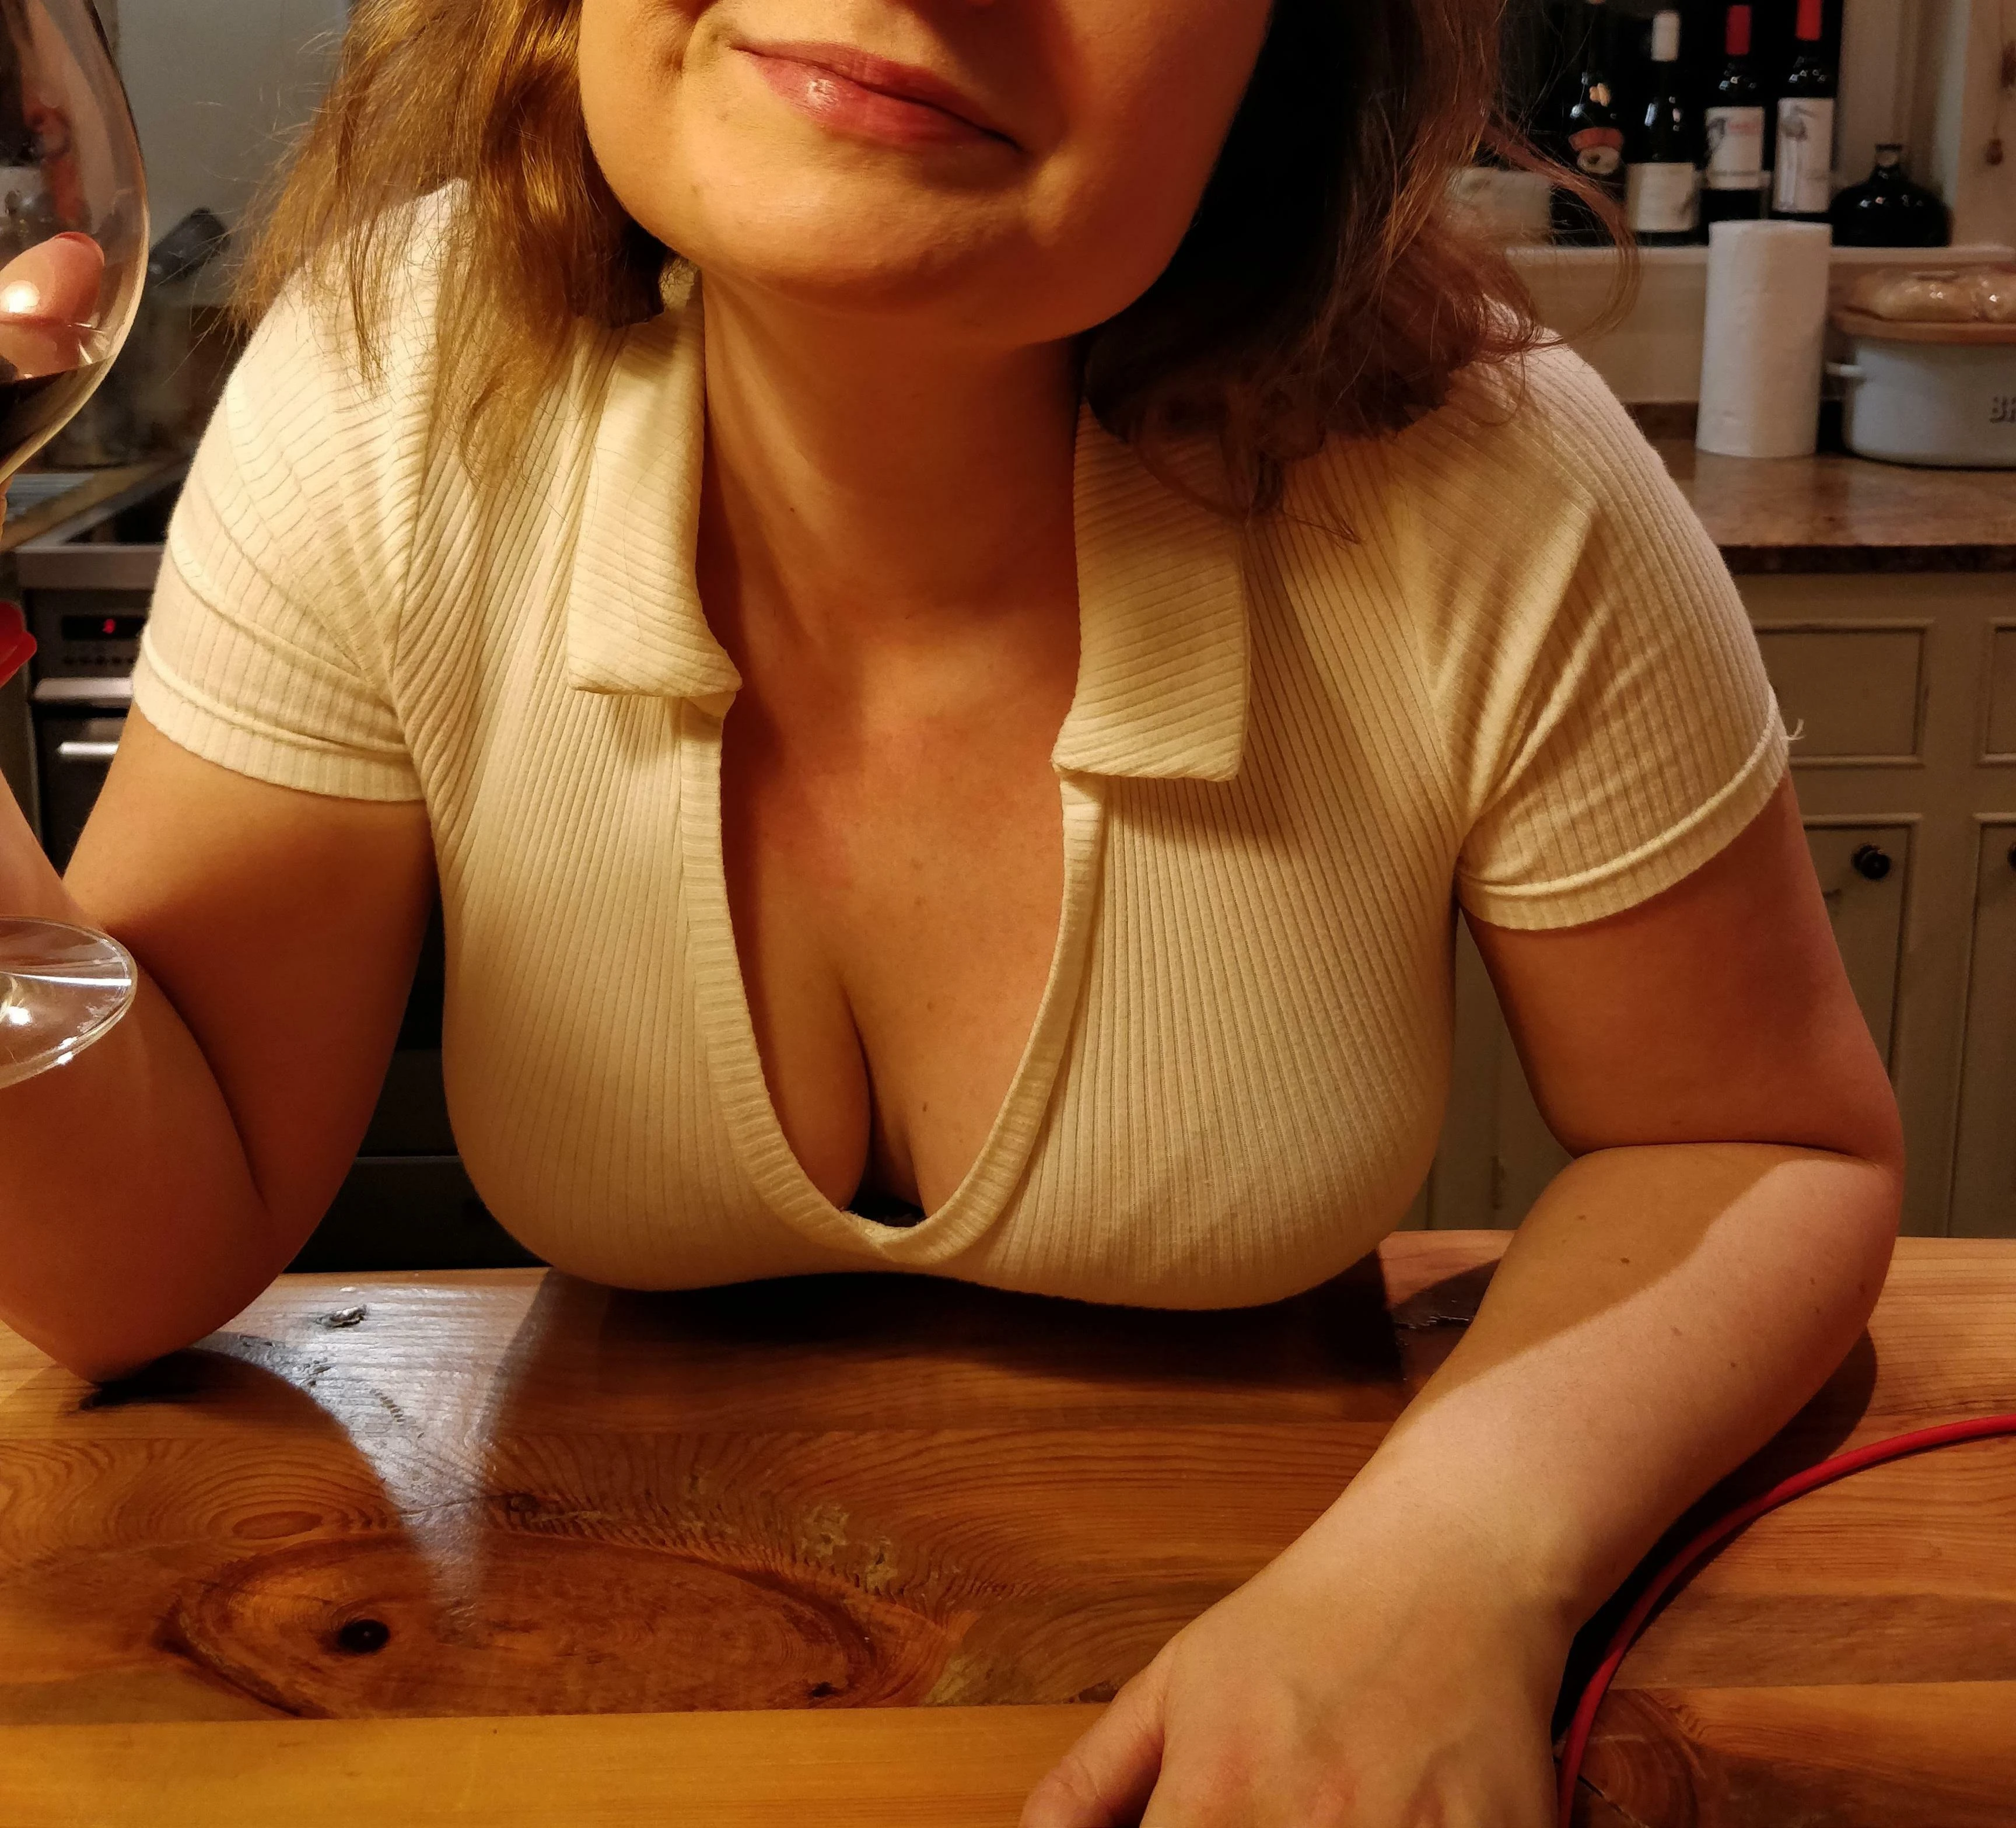 I'm smug because I know hubby can't resist these tits